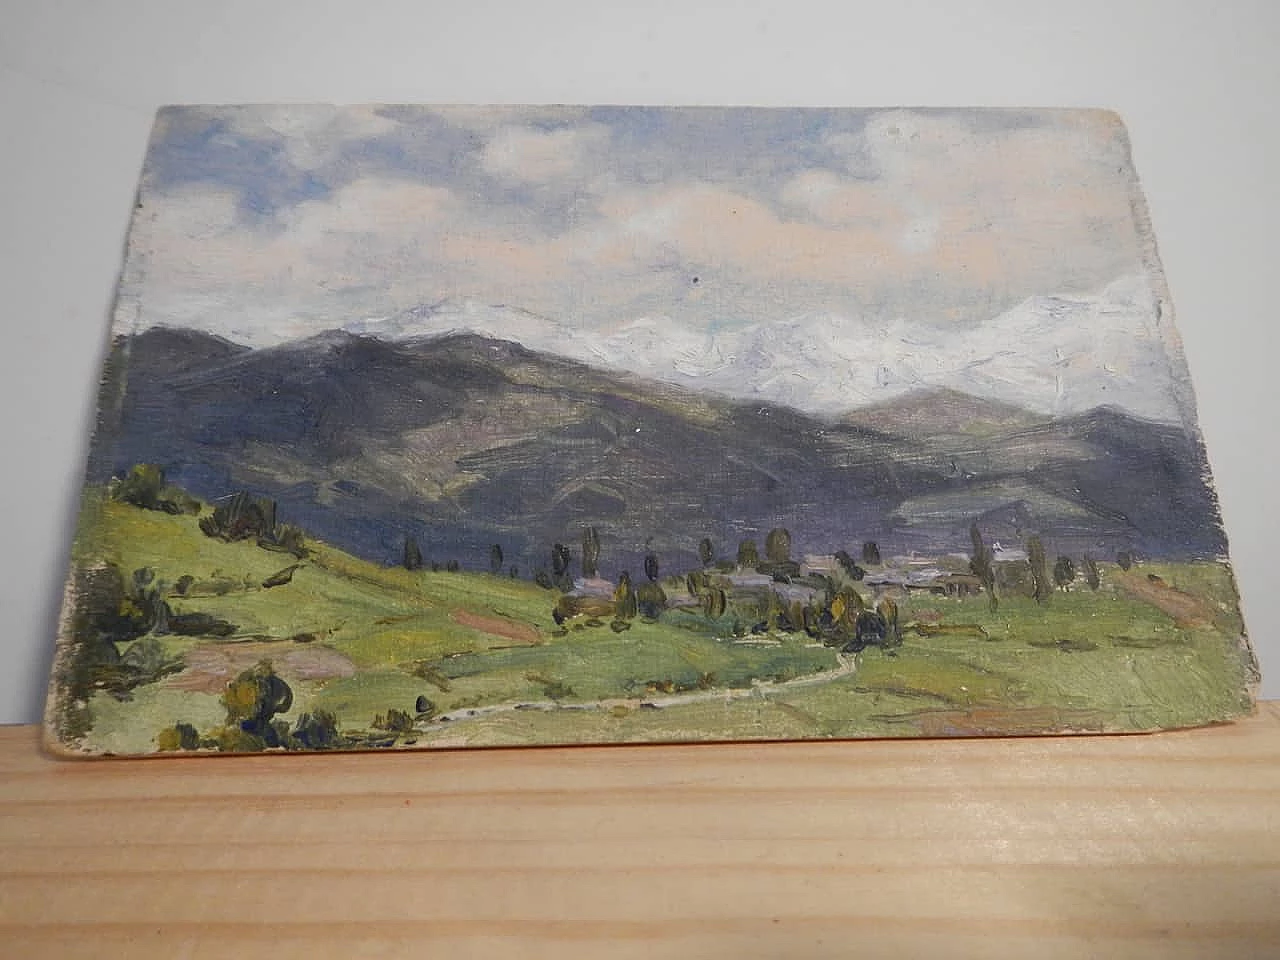 Des Champs, Pyrenees, painting on wood, early 20th century 11